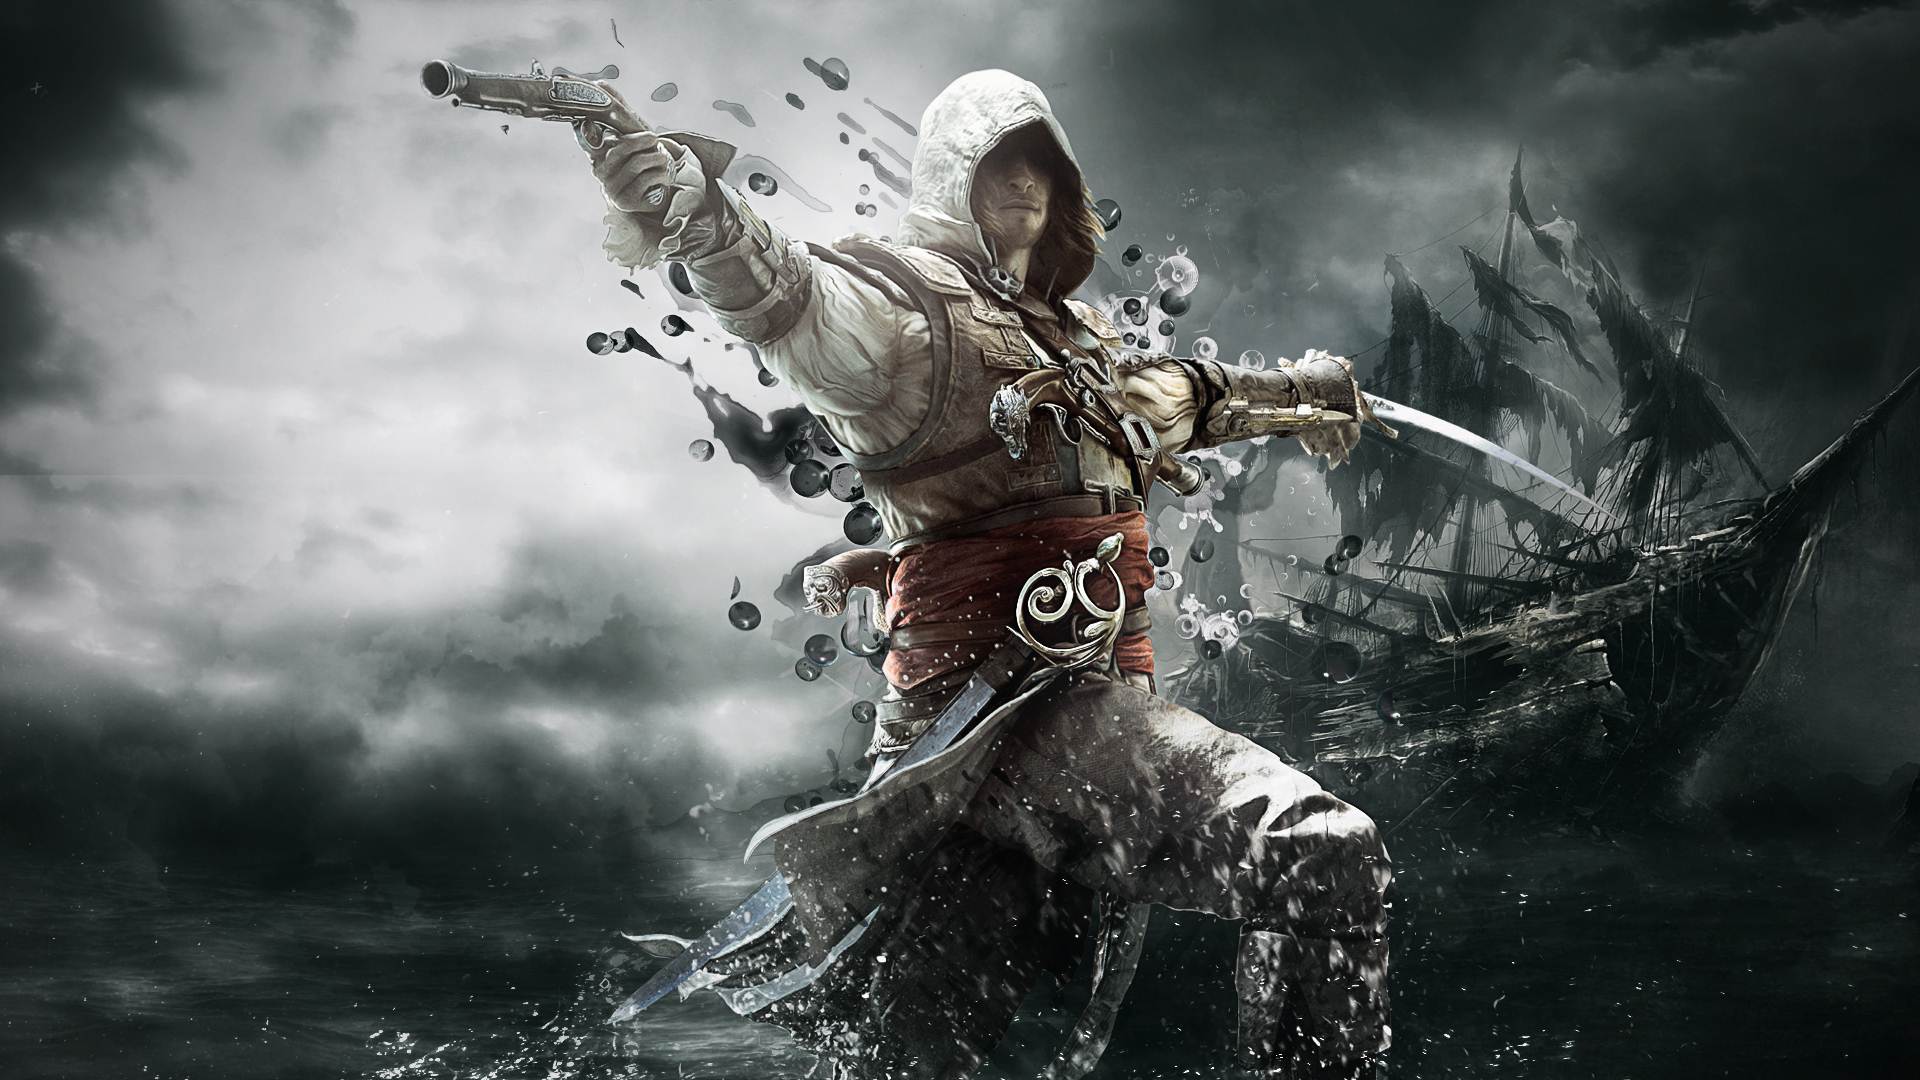 Assassin’s Creed 4 High Definition Wallpapers Images Pictures Gallery